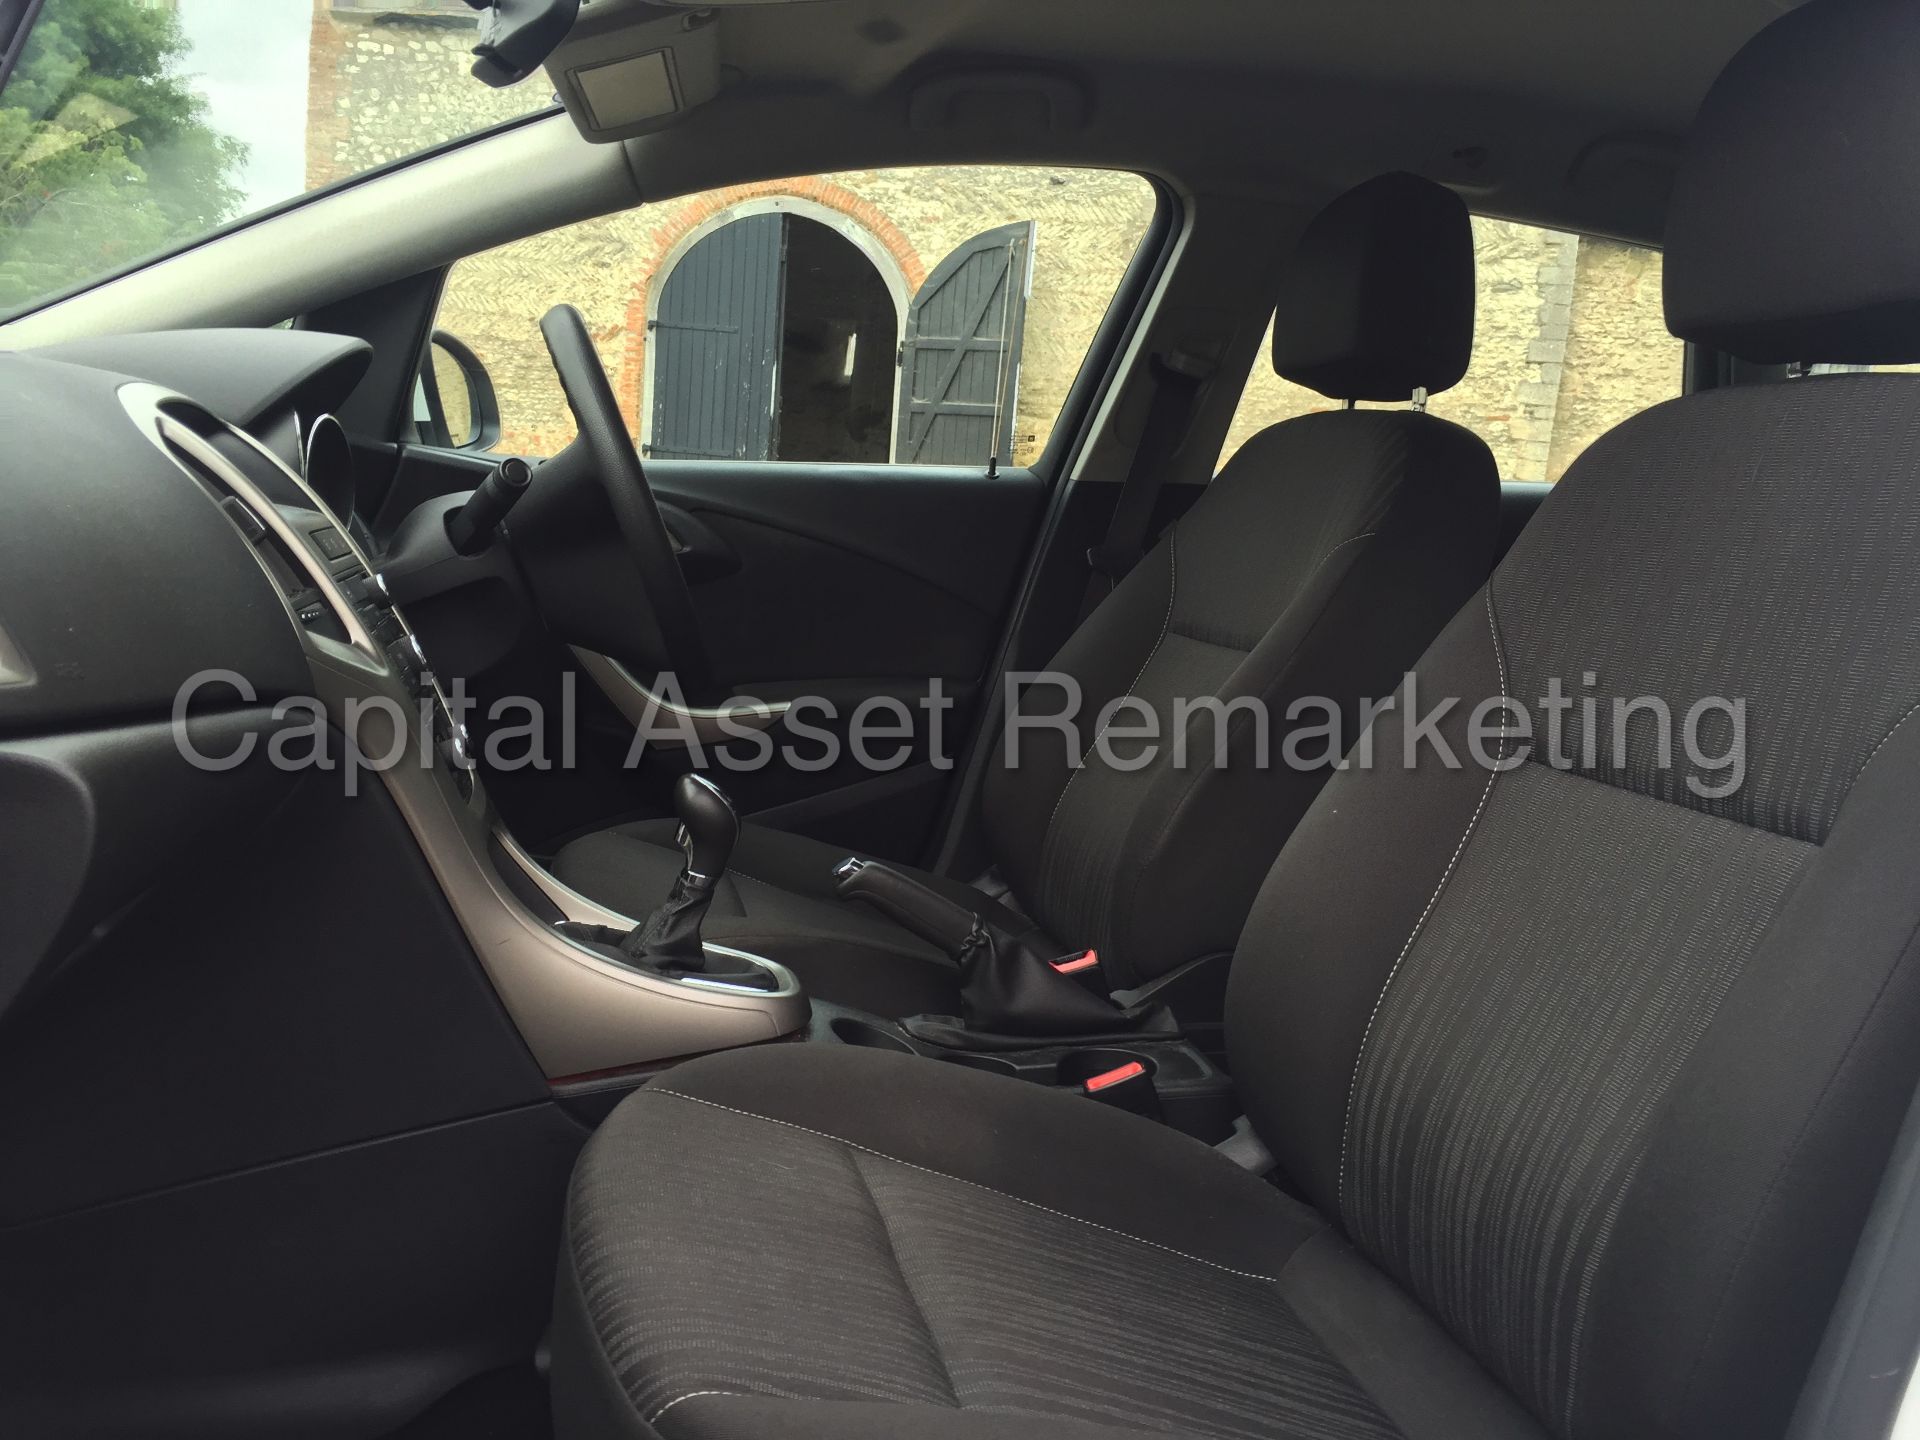 VAUXHALL ASTRA 'EXCLUSIVE' (2012 MODEL) '1.7 CDTI - ECOFLEX - 6 SPEED' *AIR CON* NO VAT - Image 13 of 24